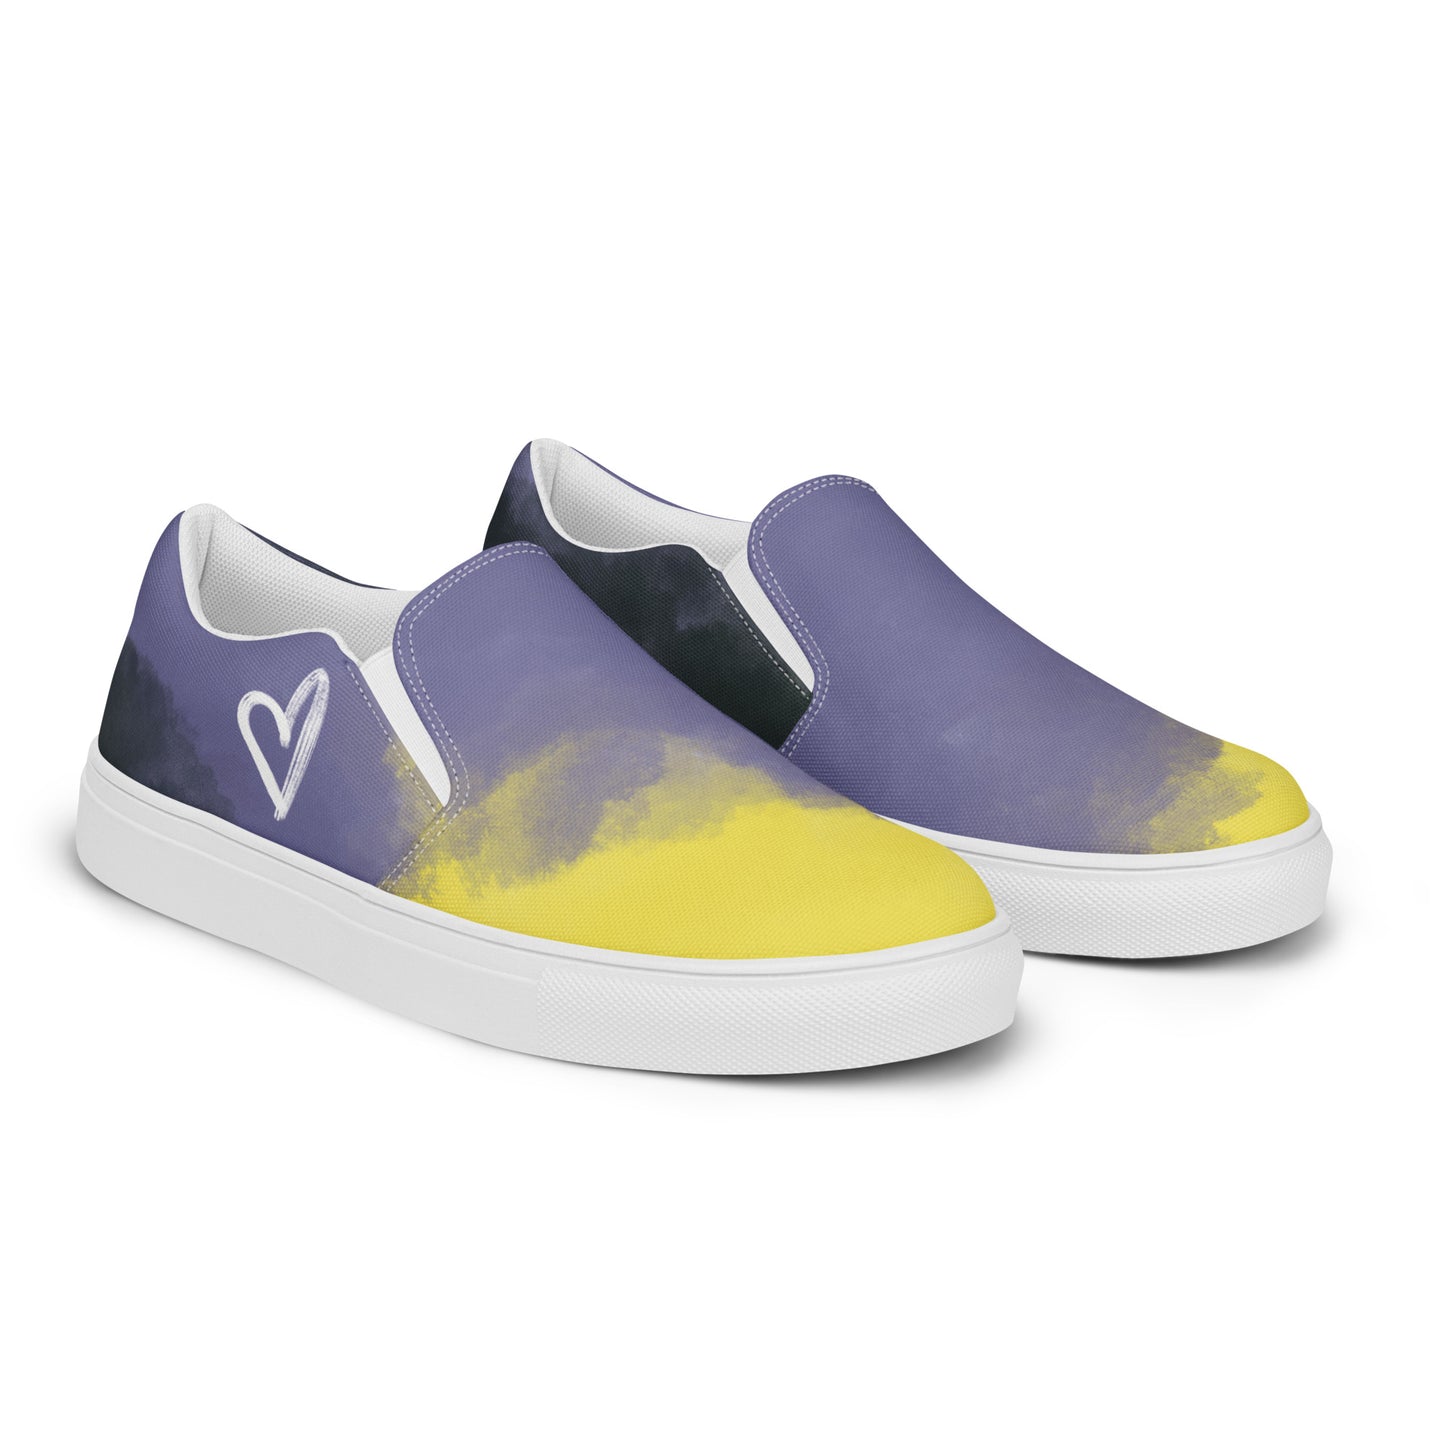 Right front view: pair of slip-on shoes with the non-binary colors in wisps of clouds with a white hand drawn heart on the outside under the ankle and the Aras Sivad Studio logo in white on the back.